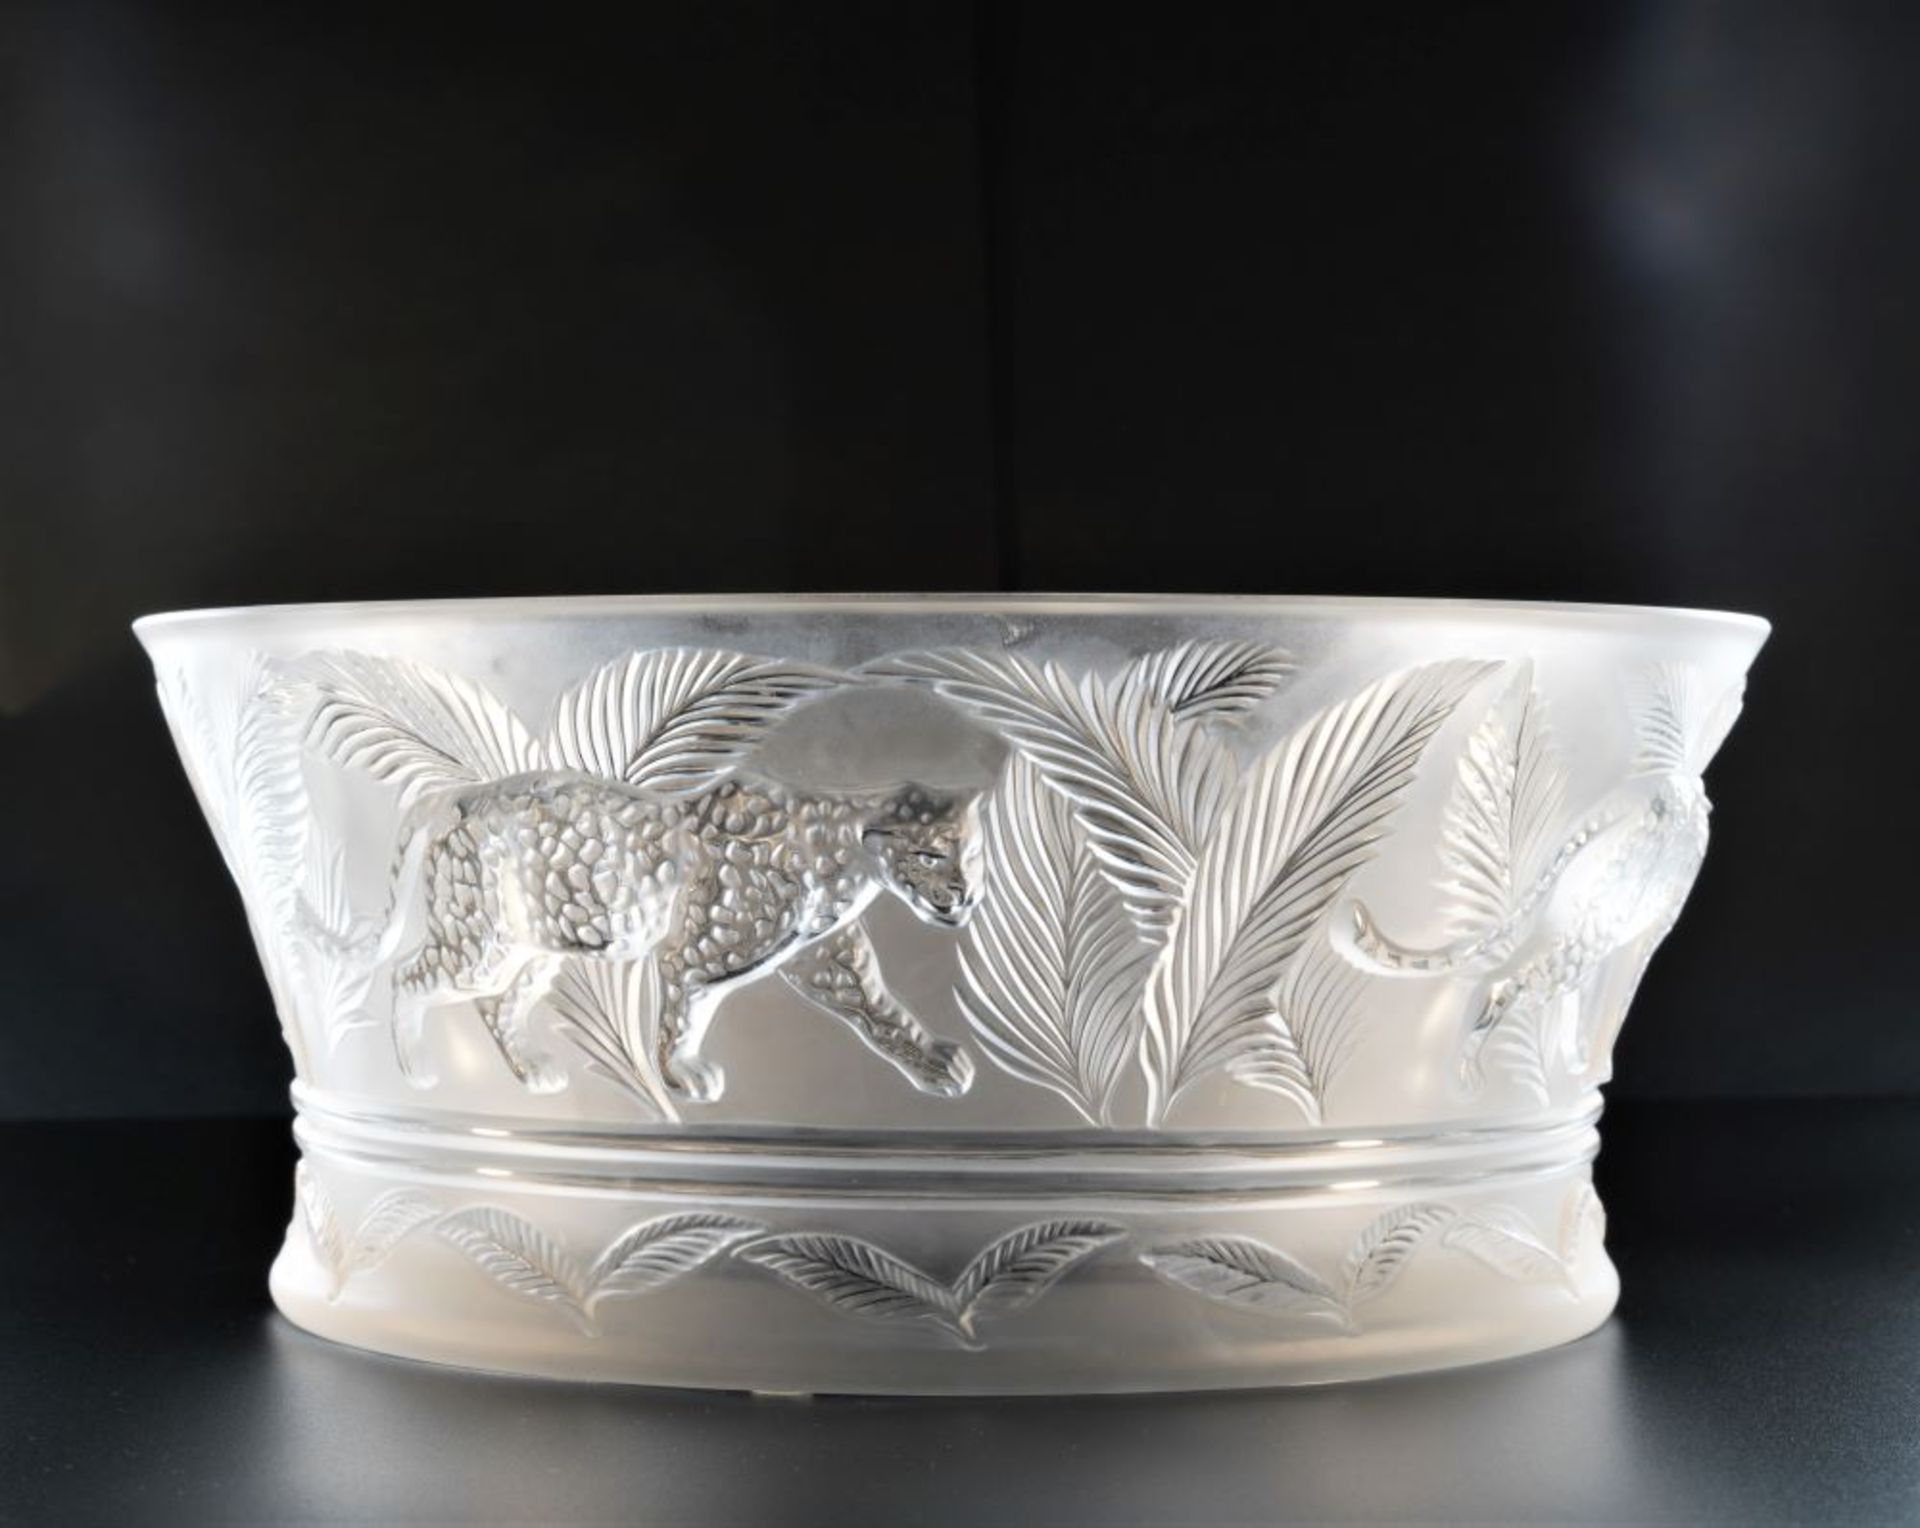 A LALIQUE Jungle Bowl in Clear Satin-Finished Crystal depicting the density of a Tropical Rainforest - Bild 2 aus 4